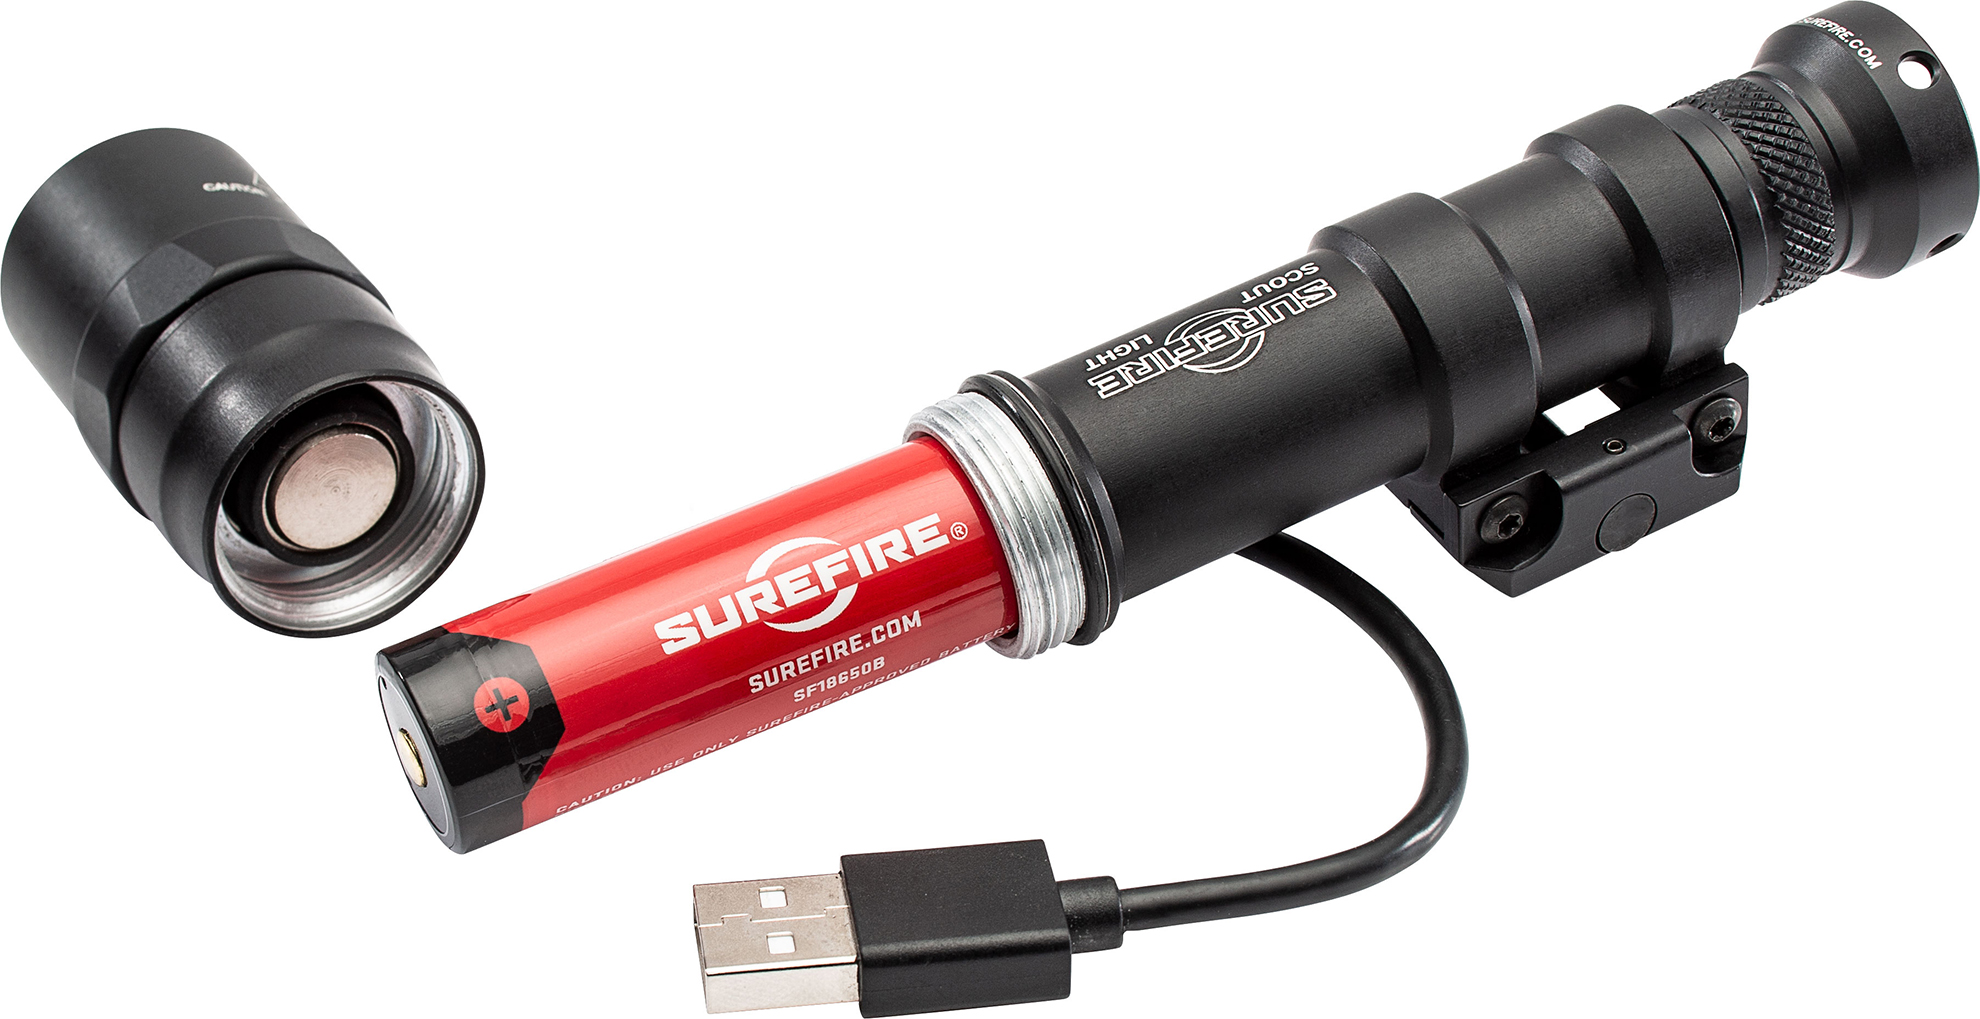 SureFire M600DF with SF18650B battery